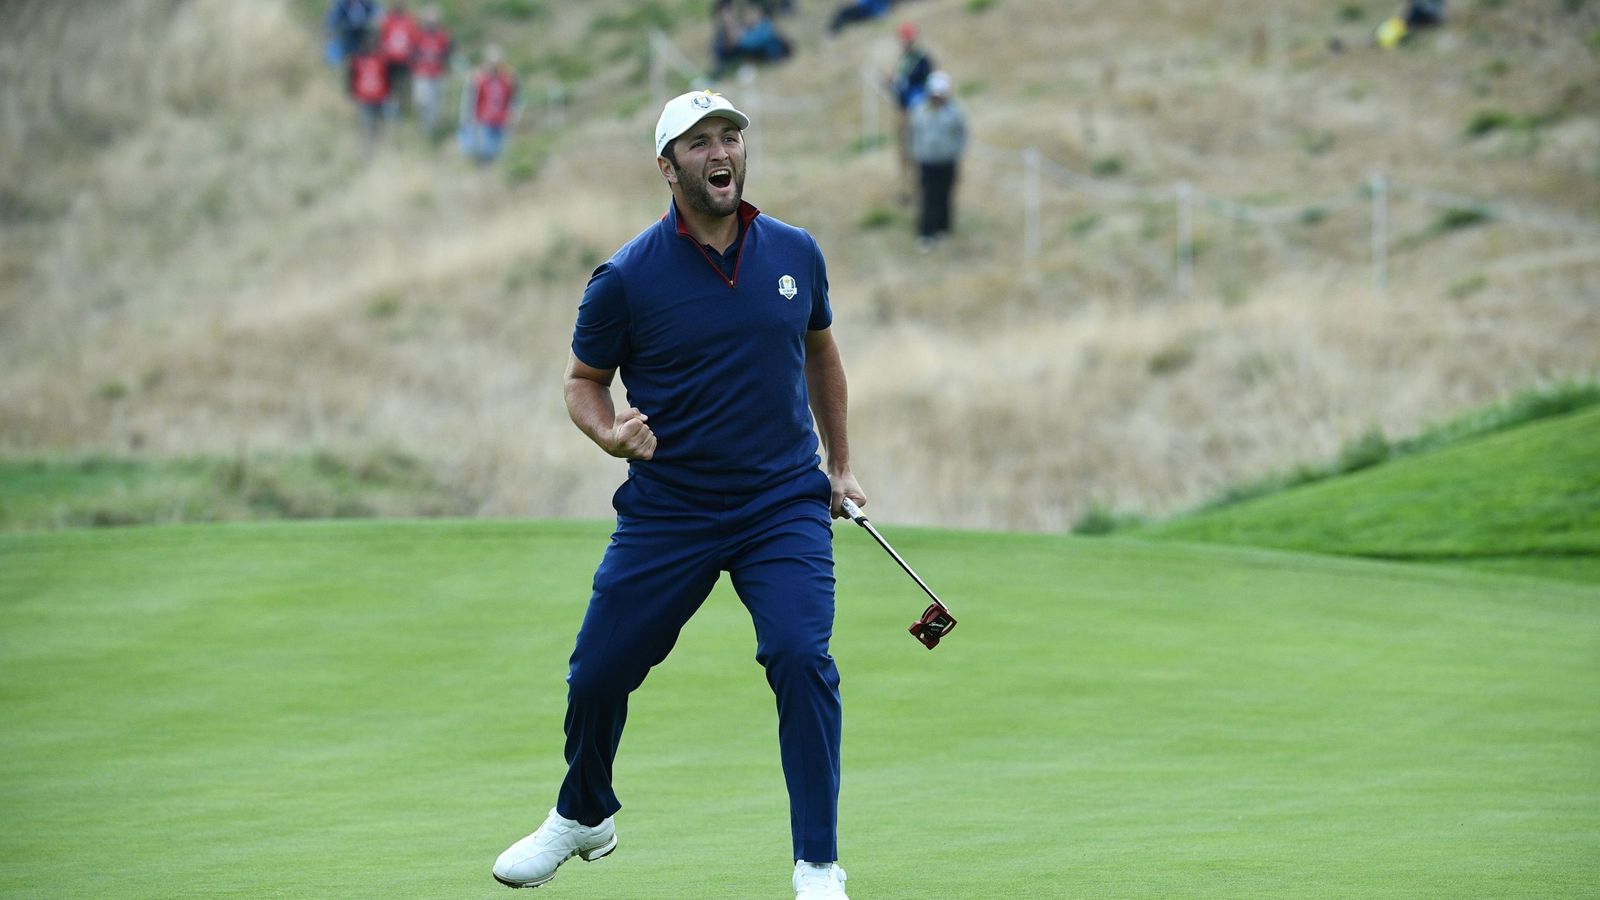 Ryder Cup 2018 Top shots from opening day at Le Golf National Golf